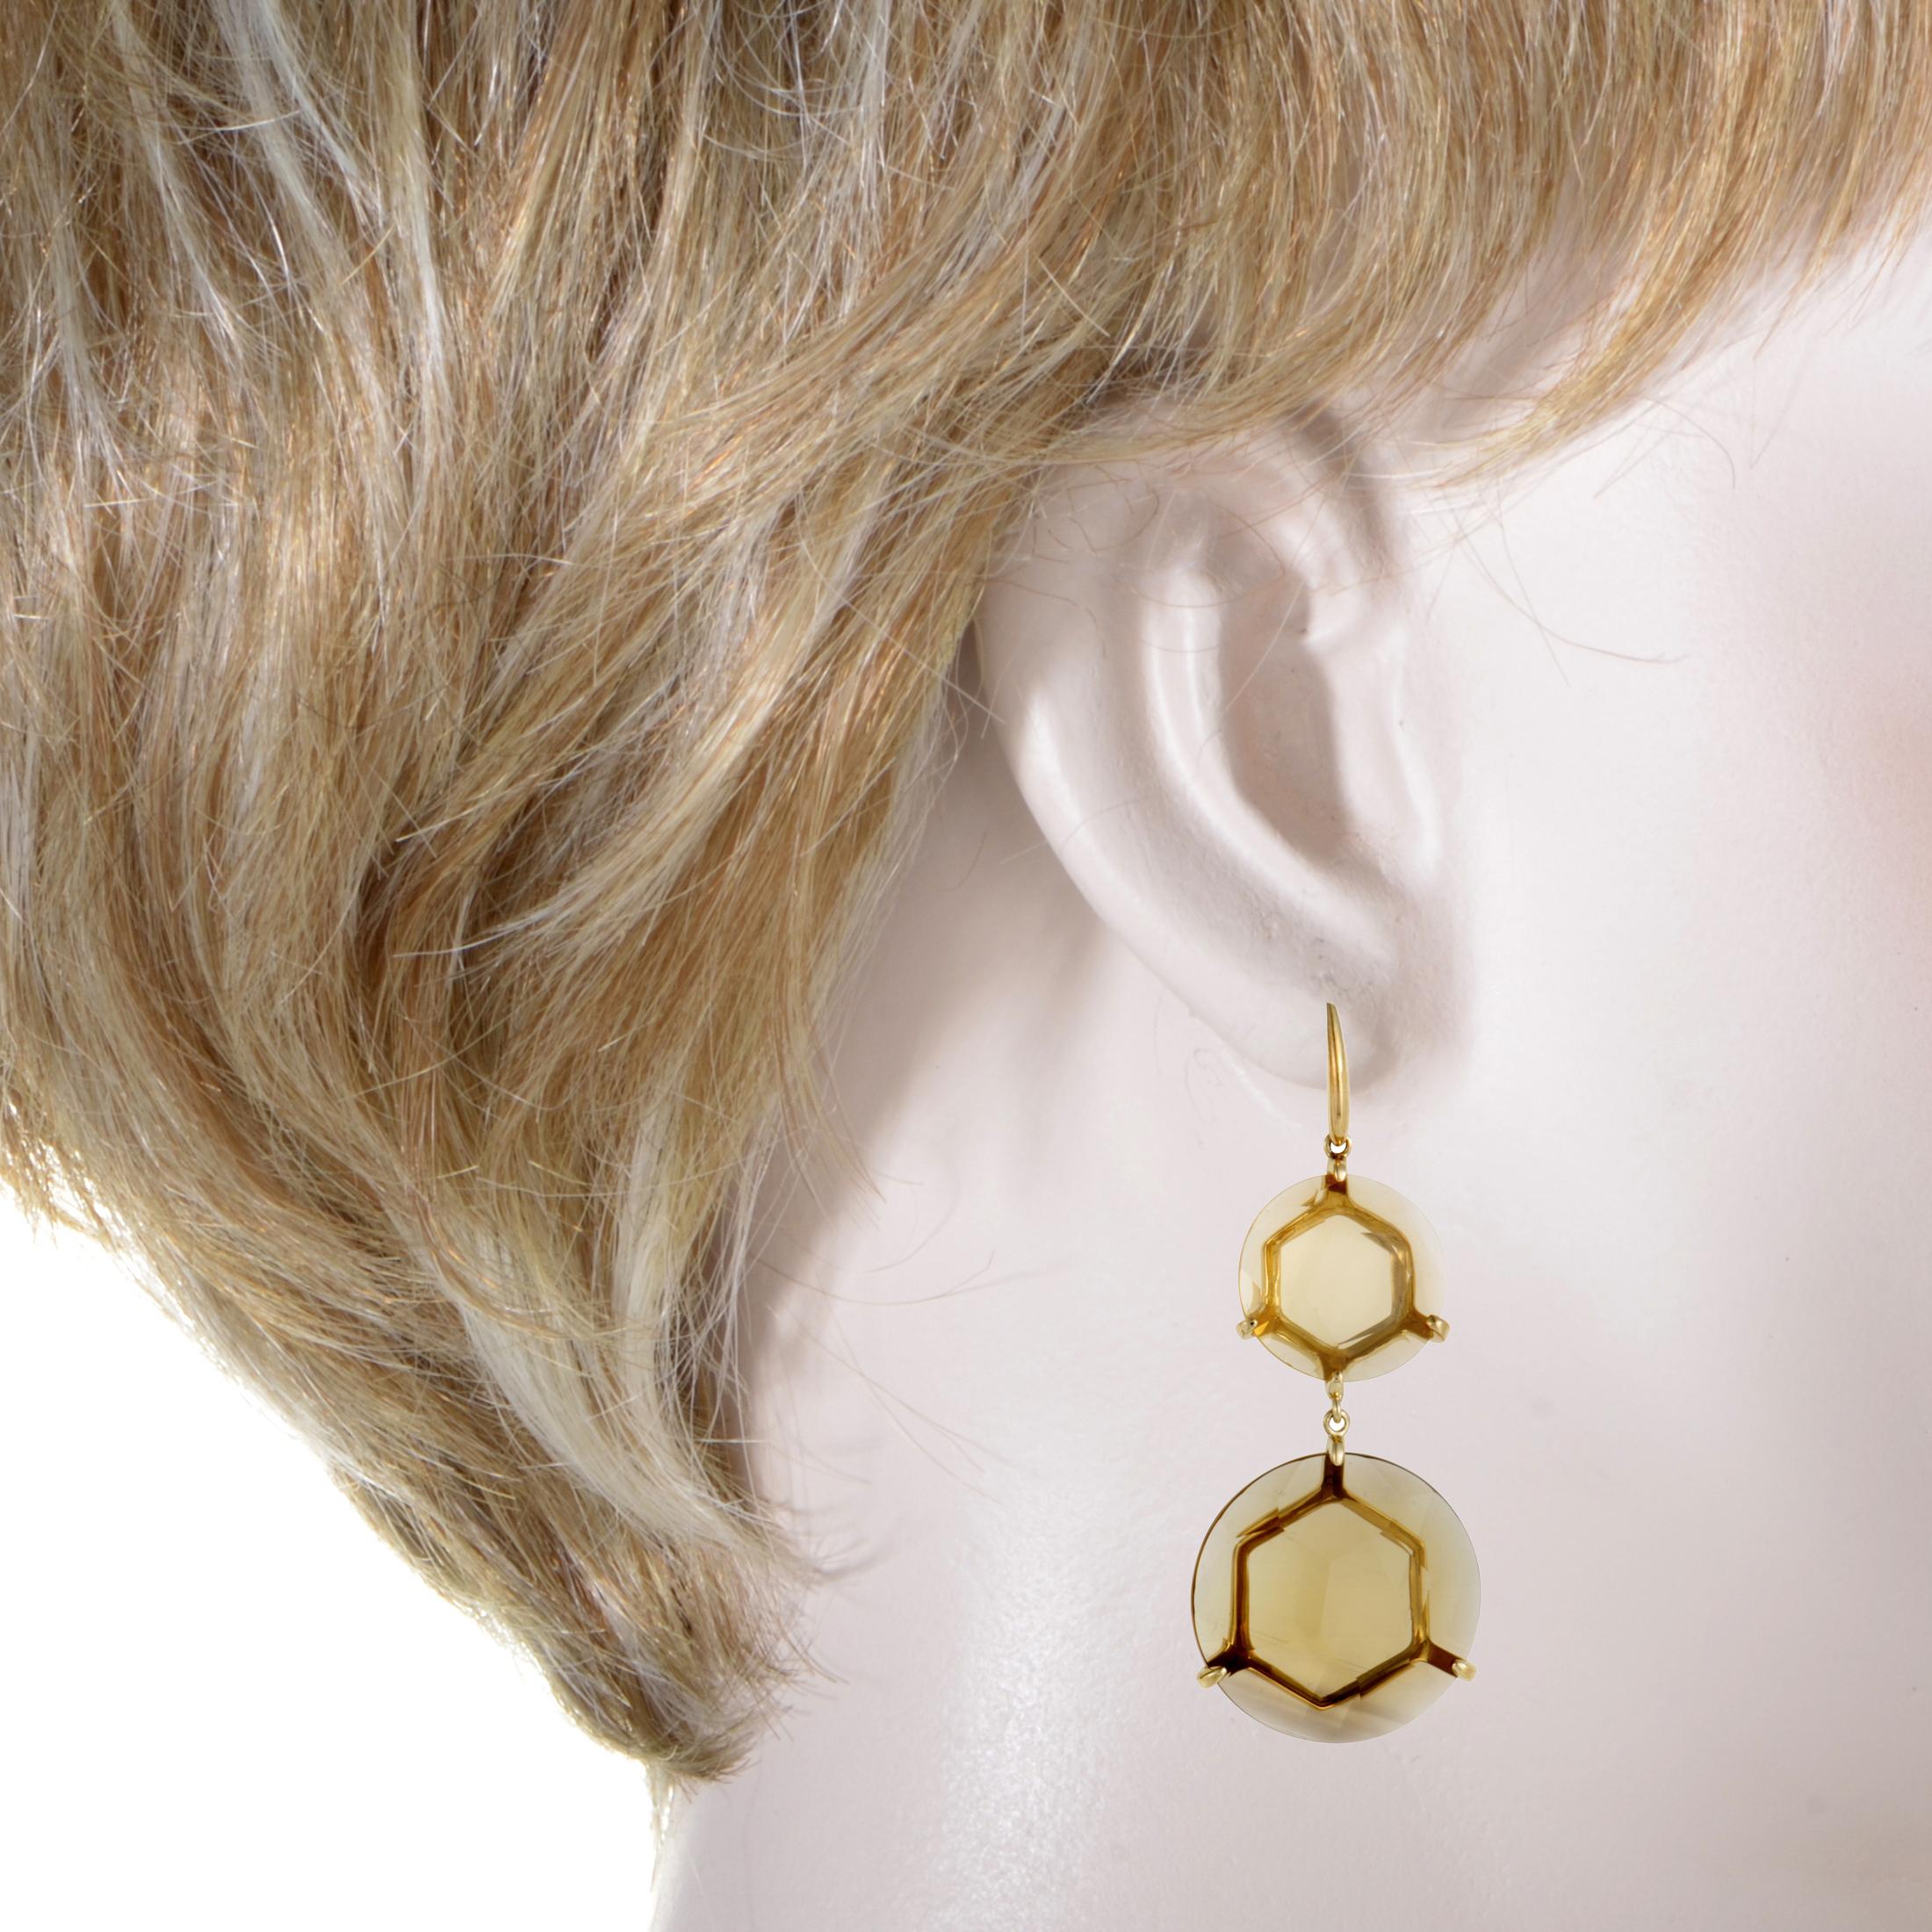 The enchantingly refined combination of prestigious 18K yellow gold and gorgeous cognac citrine is featured in these sublime earrings from Ippolita that boast nifty elegant design and classy appeal.
